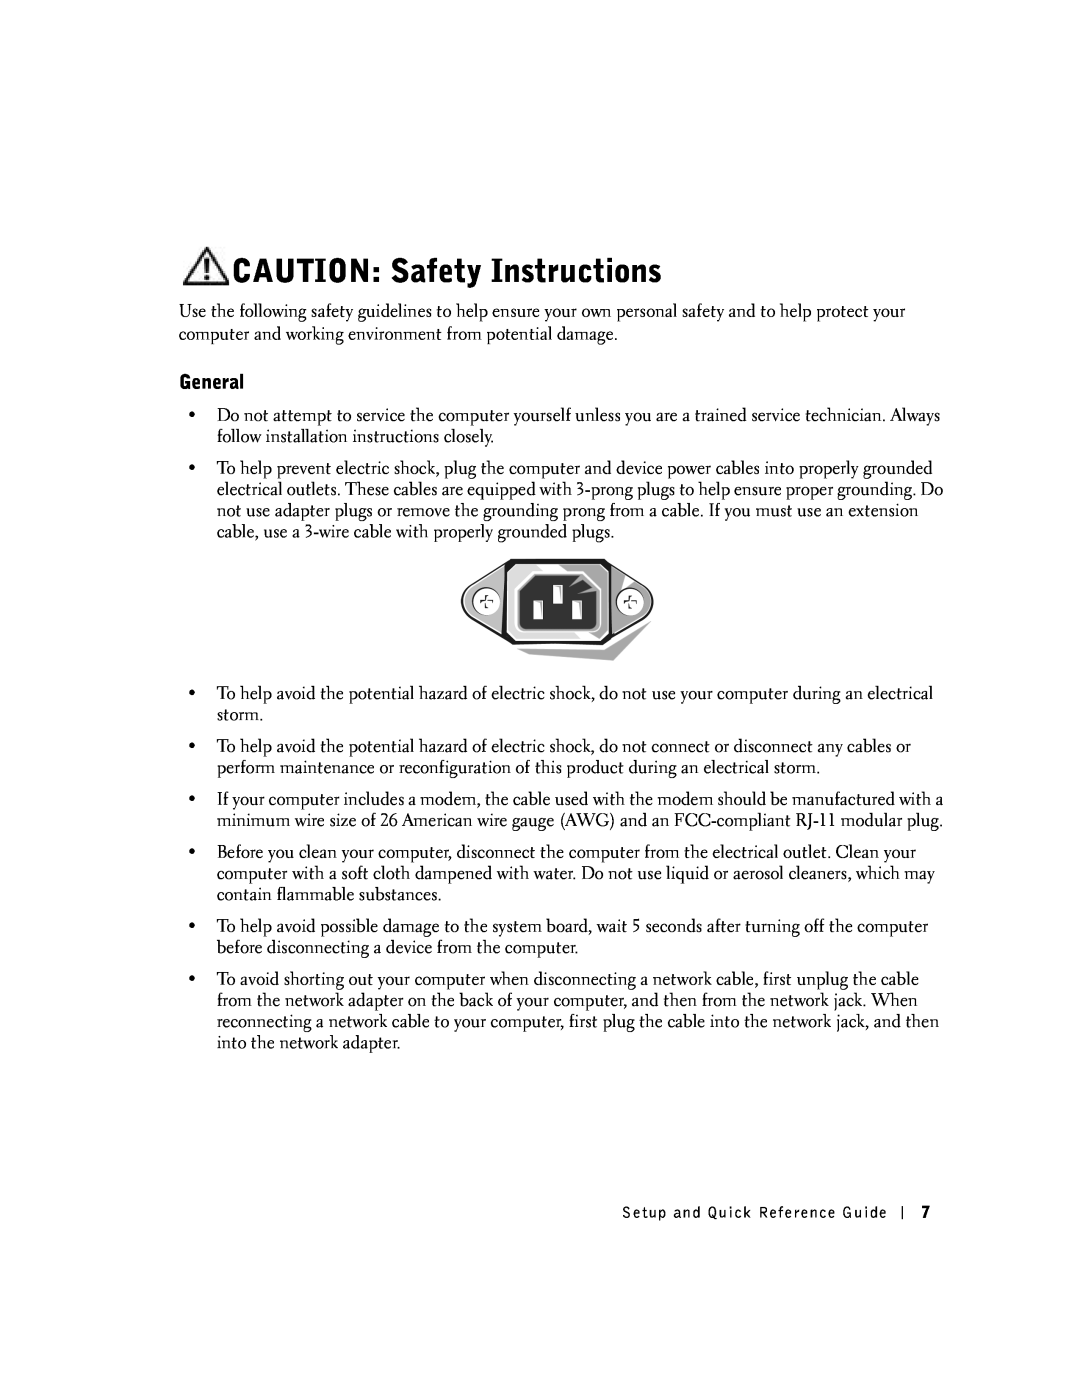 Dell SX manual CAUTION Safety Instructions, General 